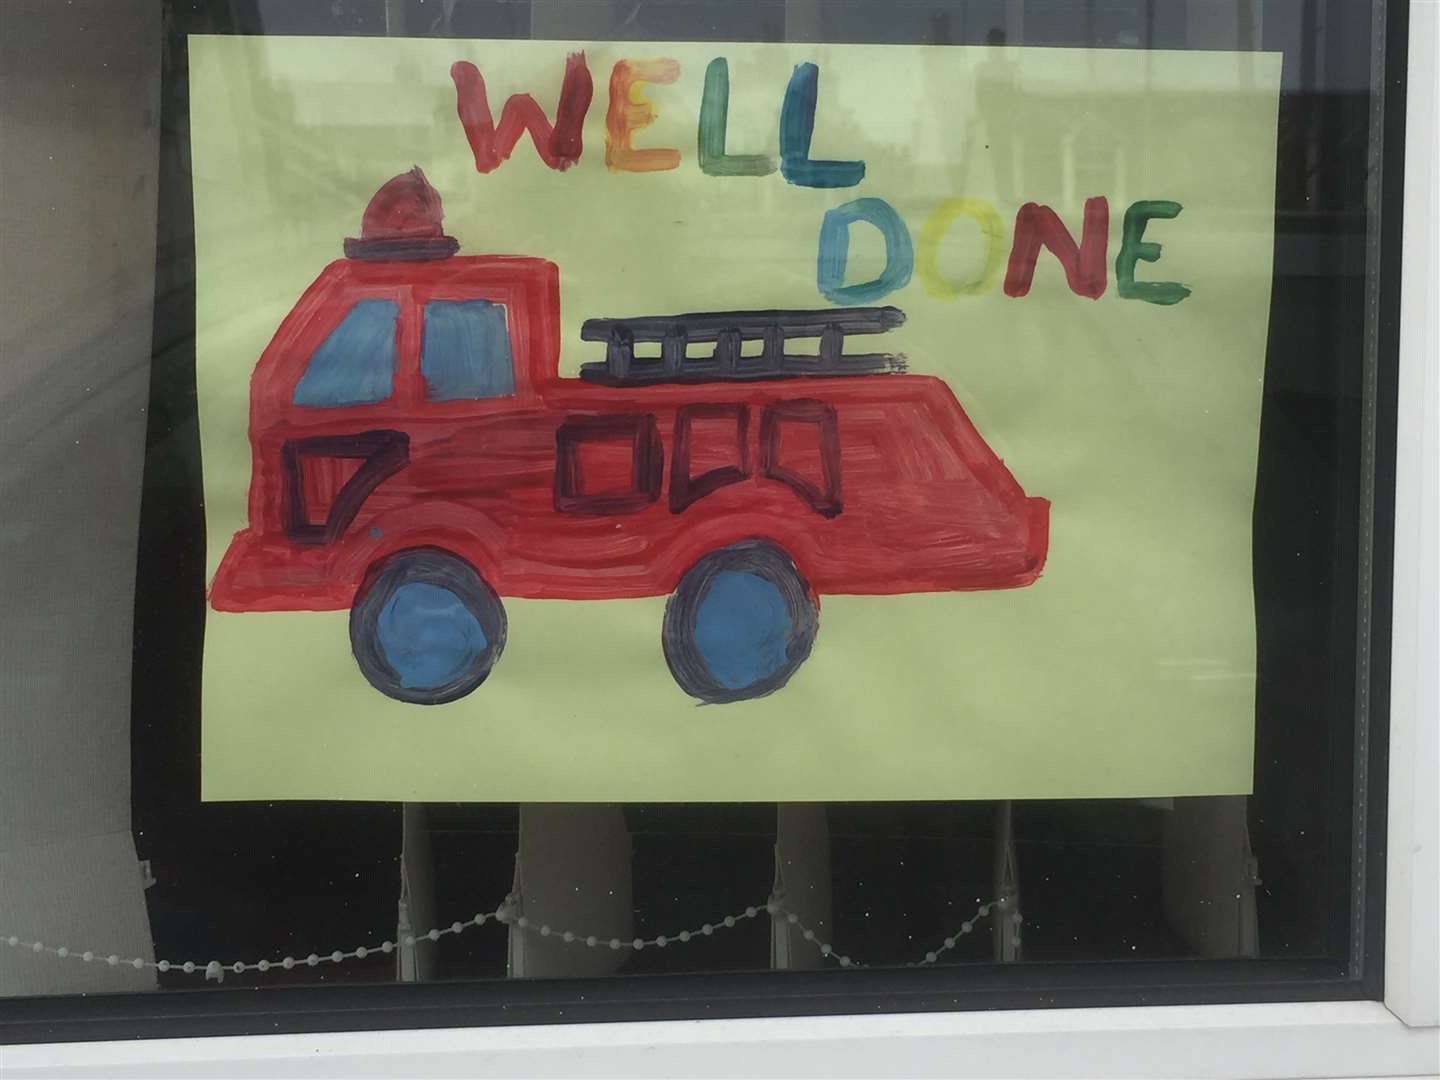 This message of appreciation from a local youngster is one of the drawings brightening up the fire station window.